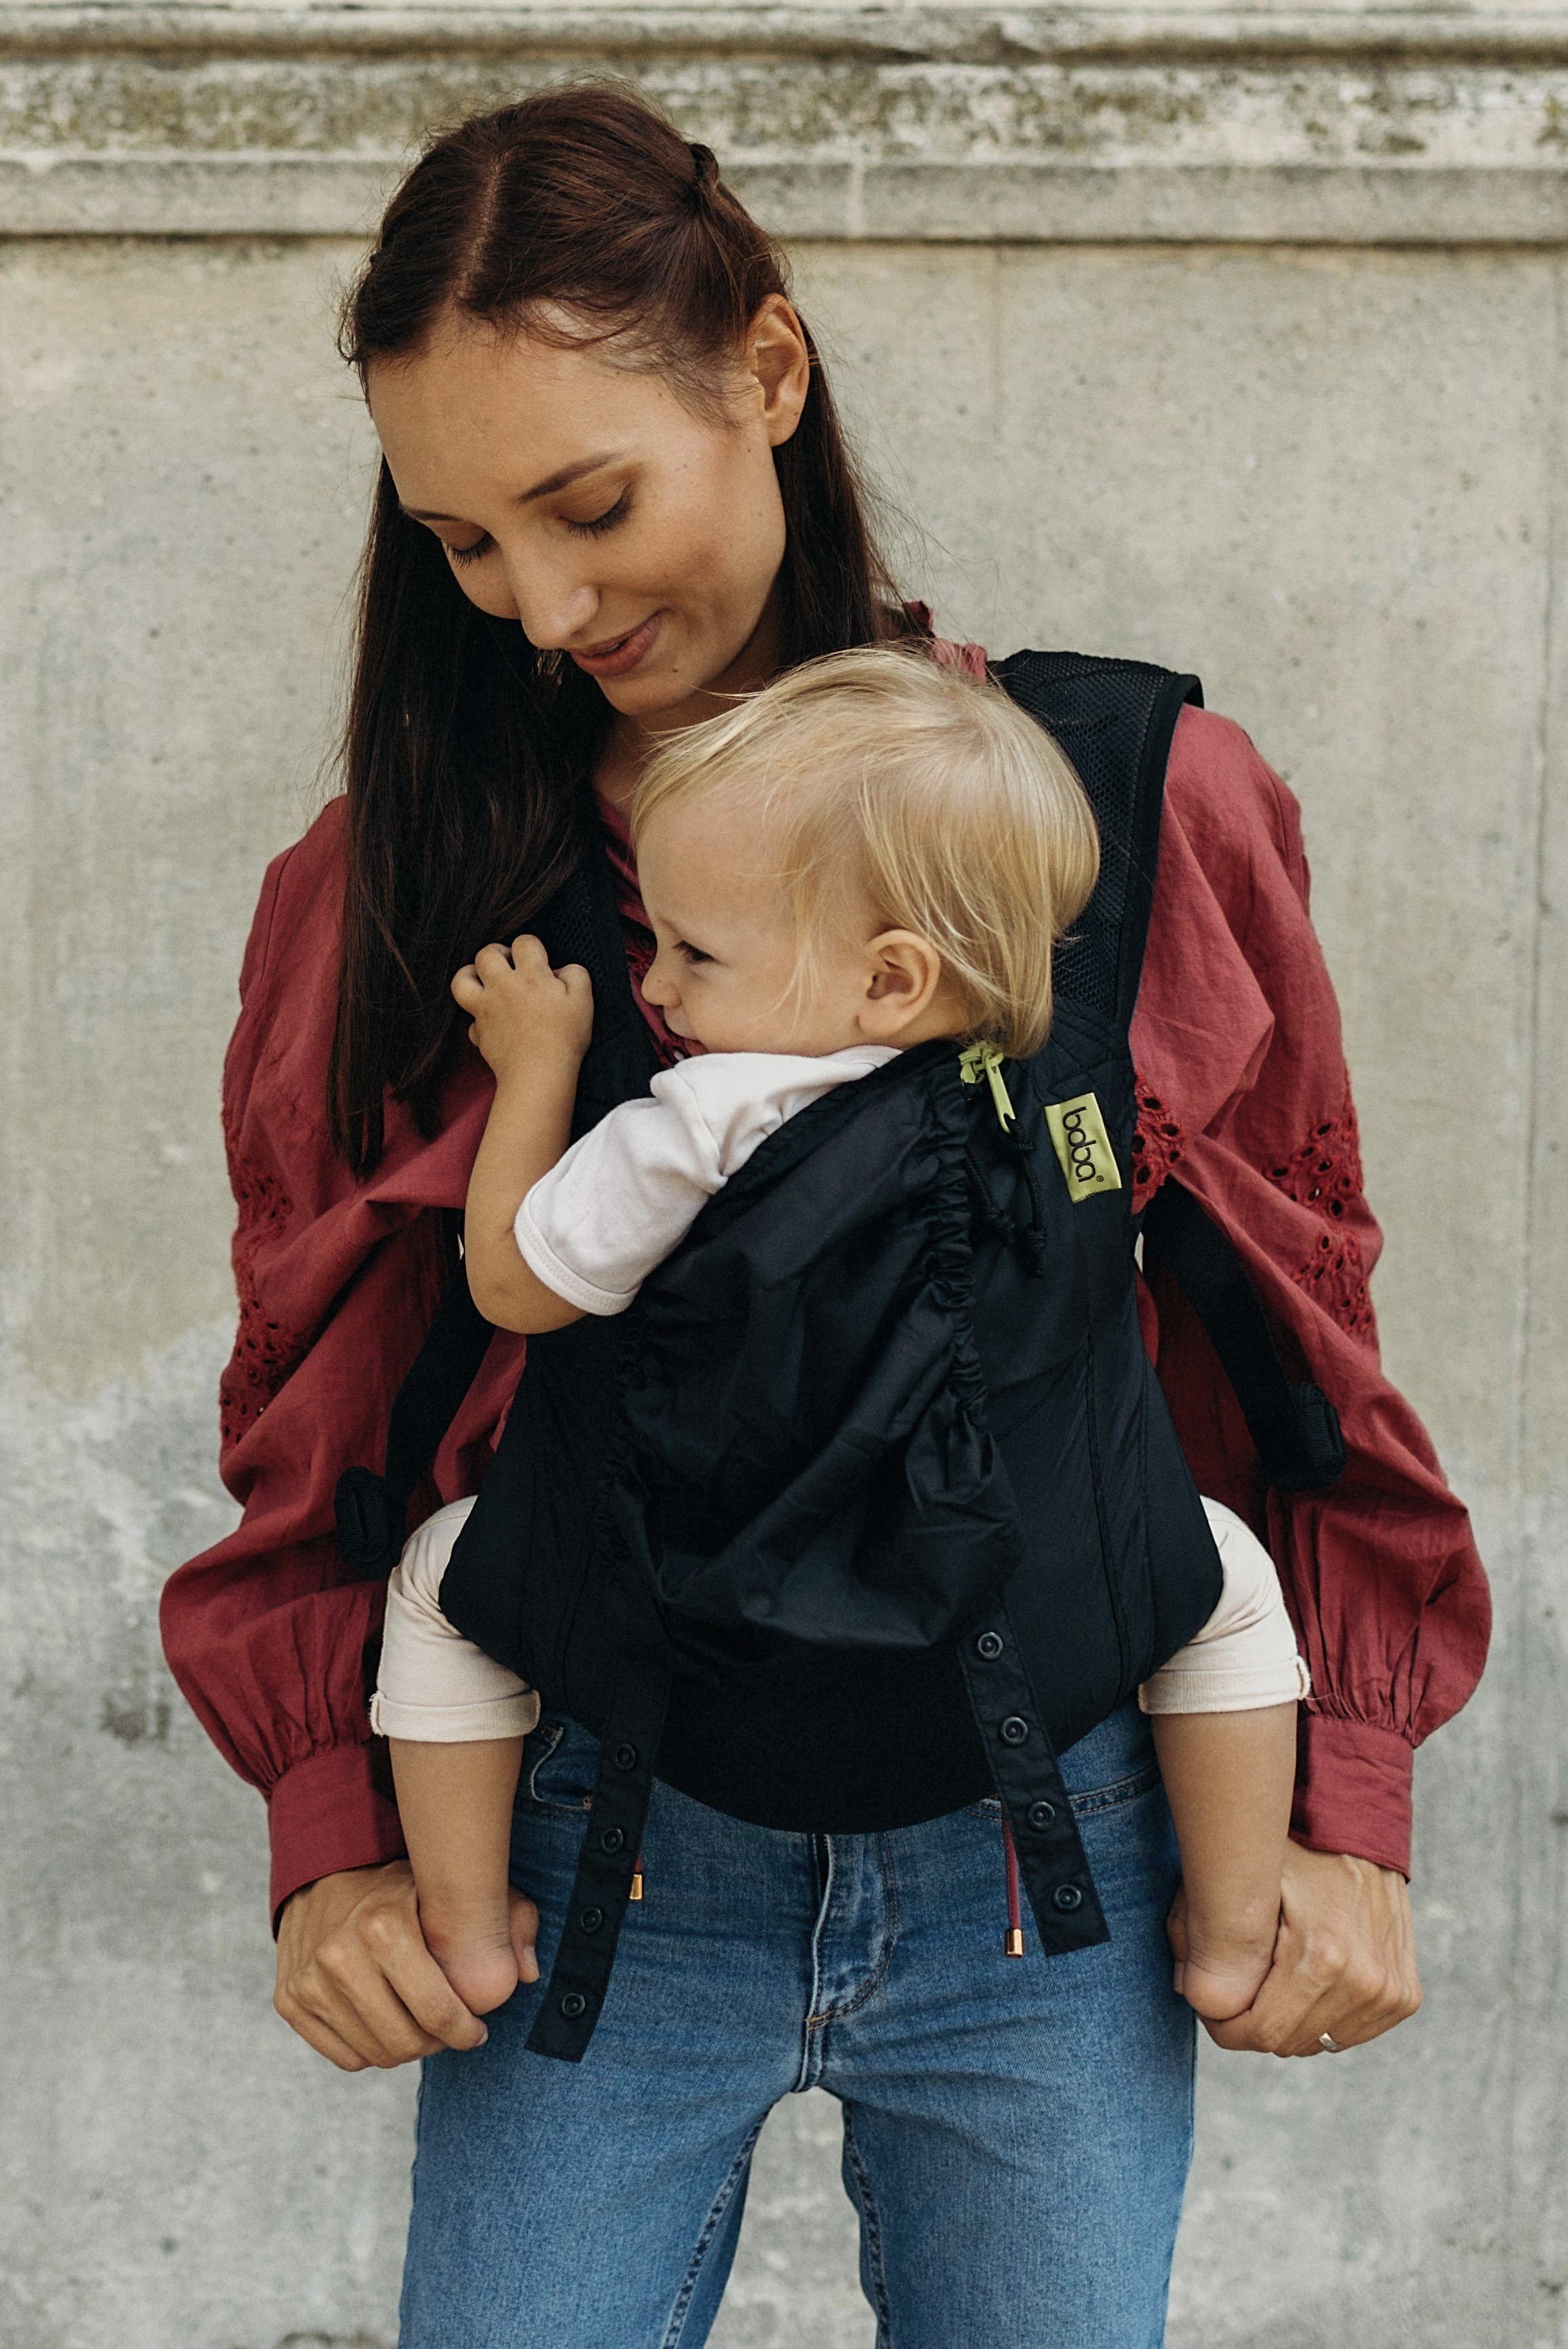 Discover our space-saving and perfectly designed Boba Air Black baby carrier that makes your travels with your little one a breeze! Our ergonomic and lightweight model is designed to carry babies from 4 months up to 45 lbs so you can experience convenience and ease on-the-go!